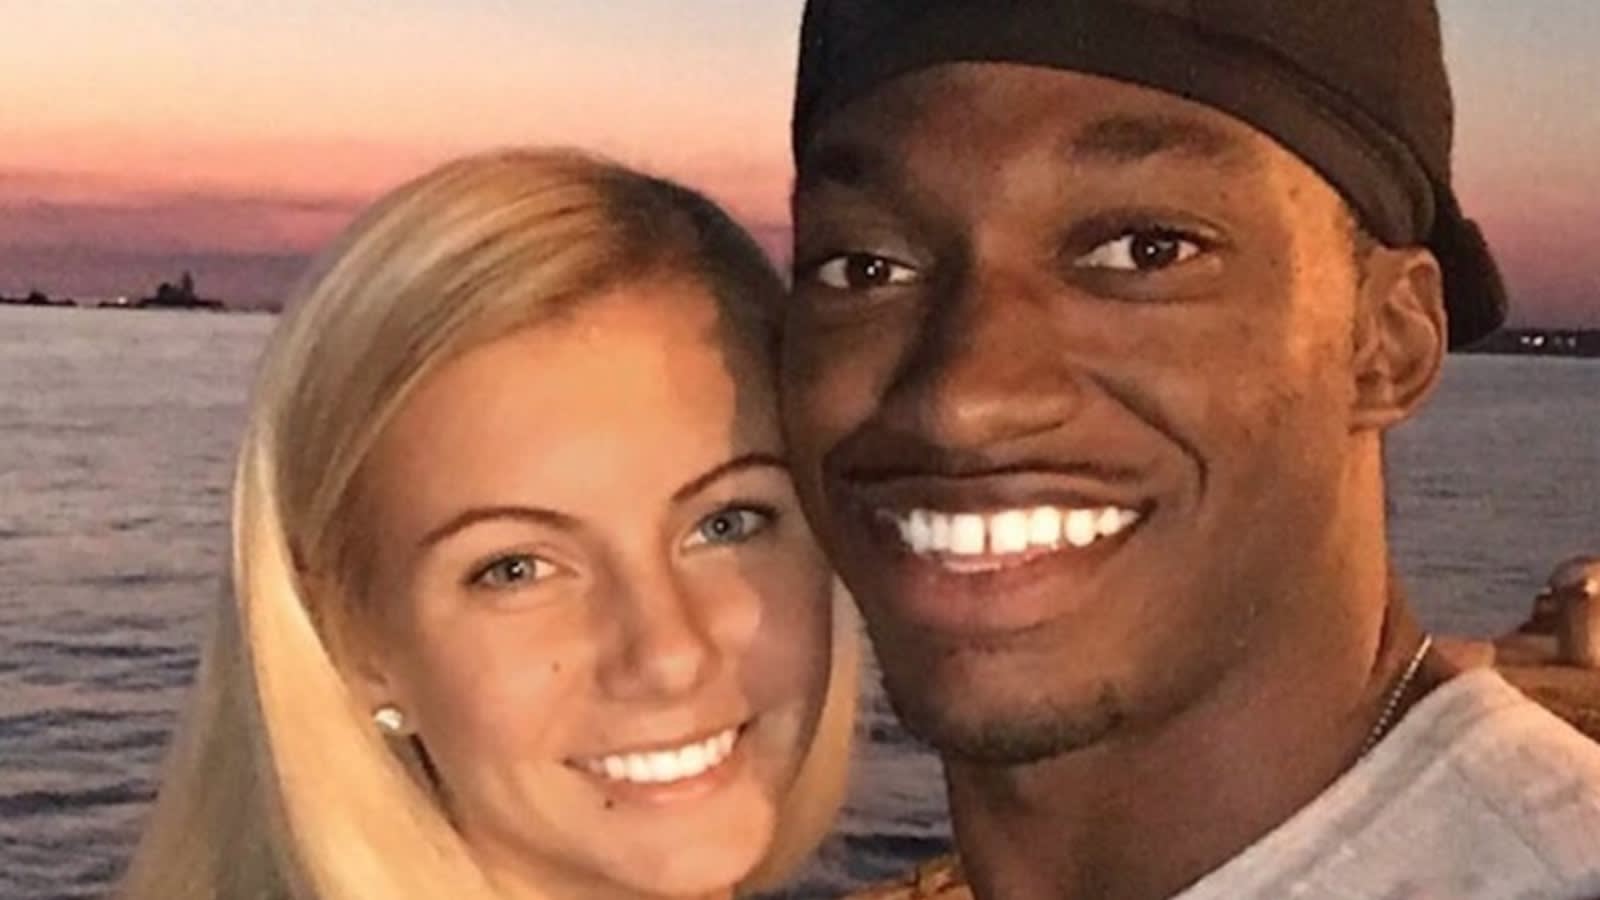 Browns comment on alleged theft involving RG3, girlfriend